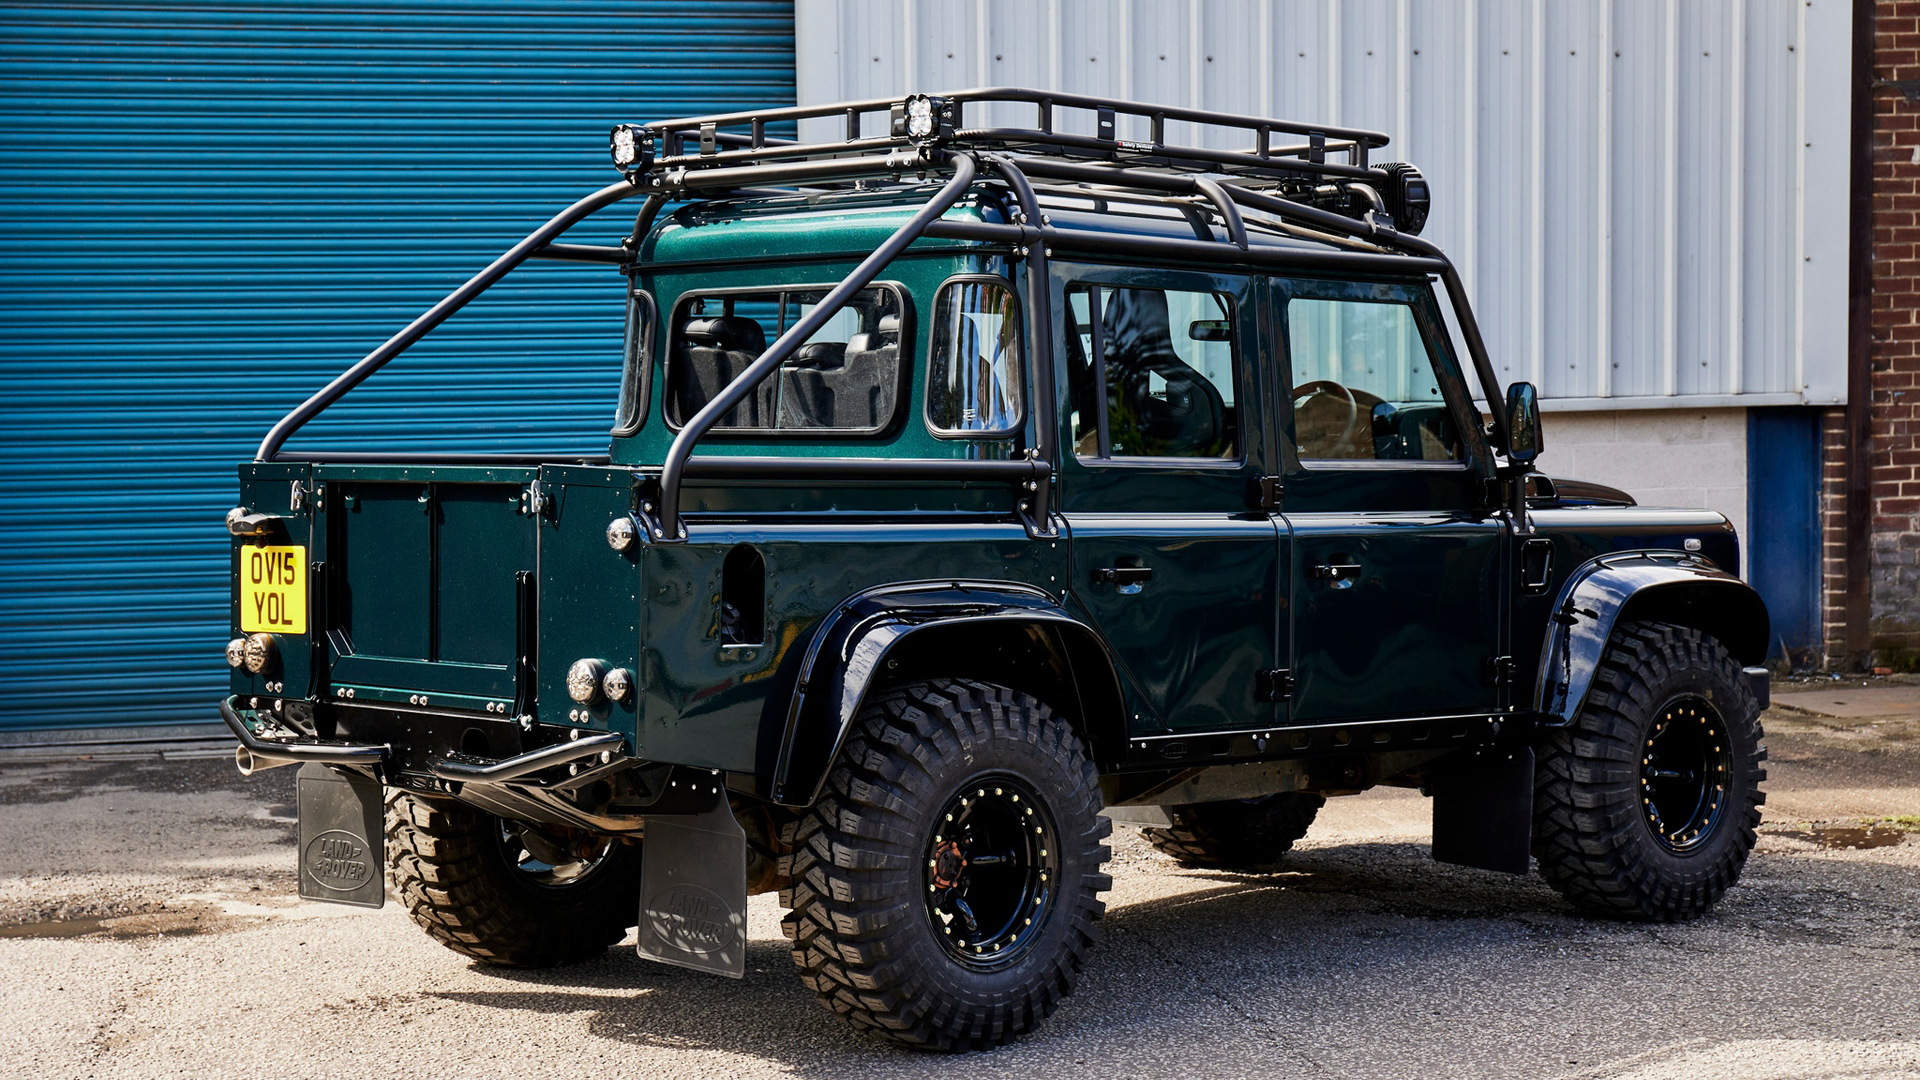 Bowler Extreme conversion for the Land Rover Defender